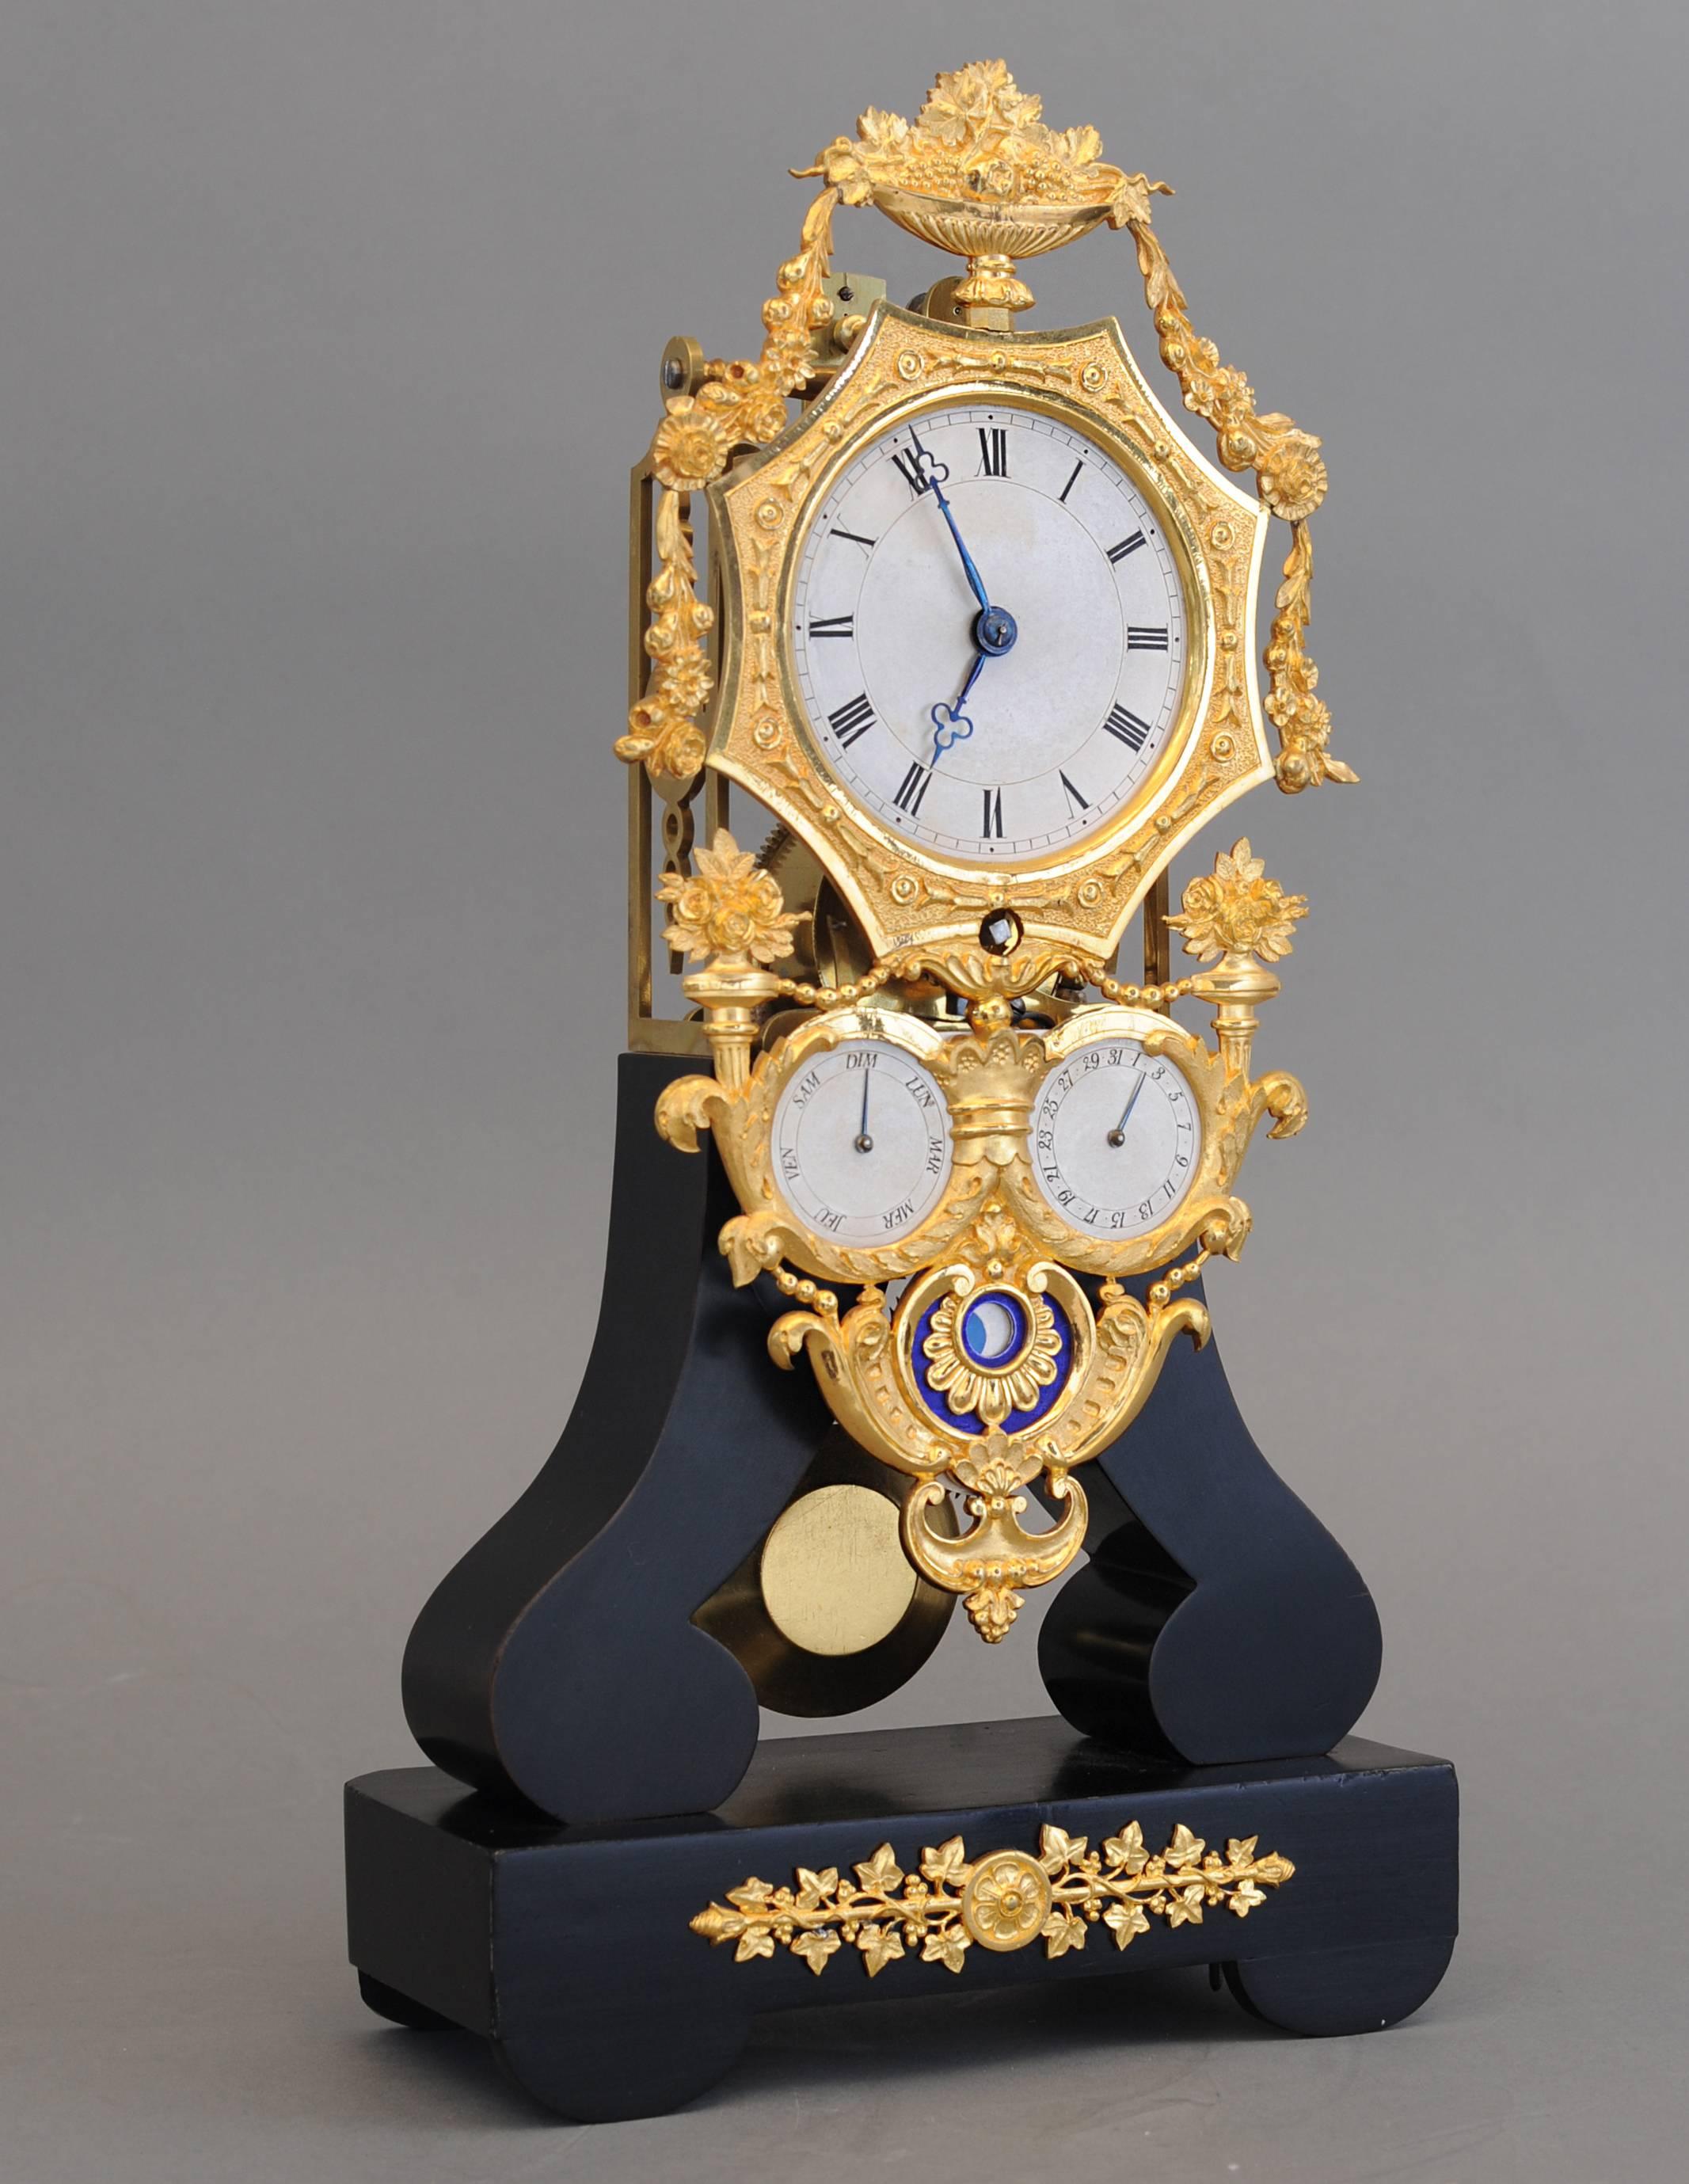 A very nice decorative well proportioned and interesting four dial Louis Philippe French skeleton clock from circa 1840. The high-quality Ormolu engraved frame with several dials: Hours, minutes, days, calendar, moon phases. Together with the